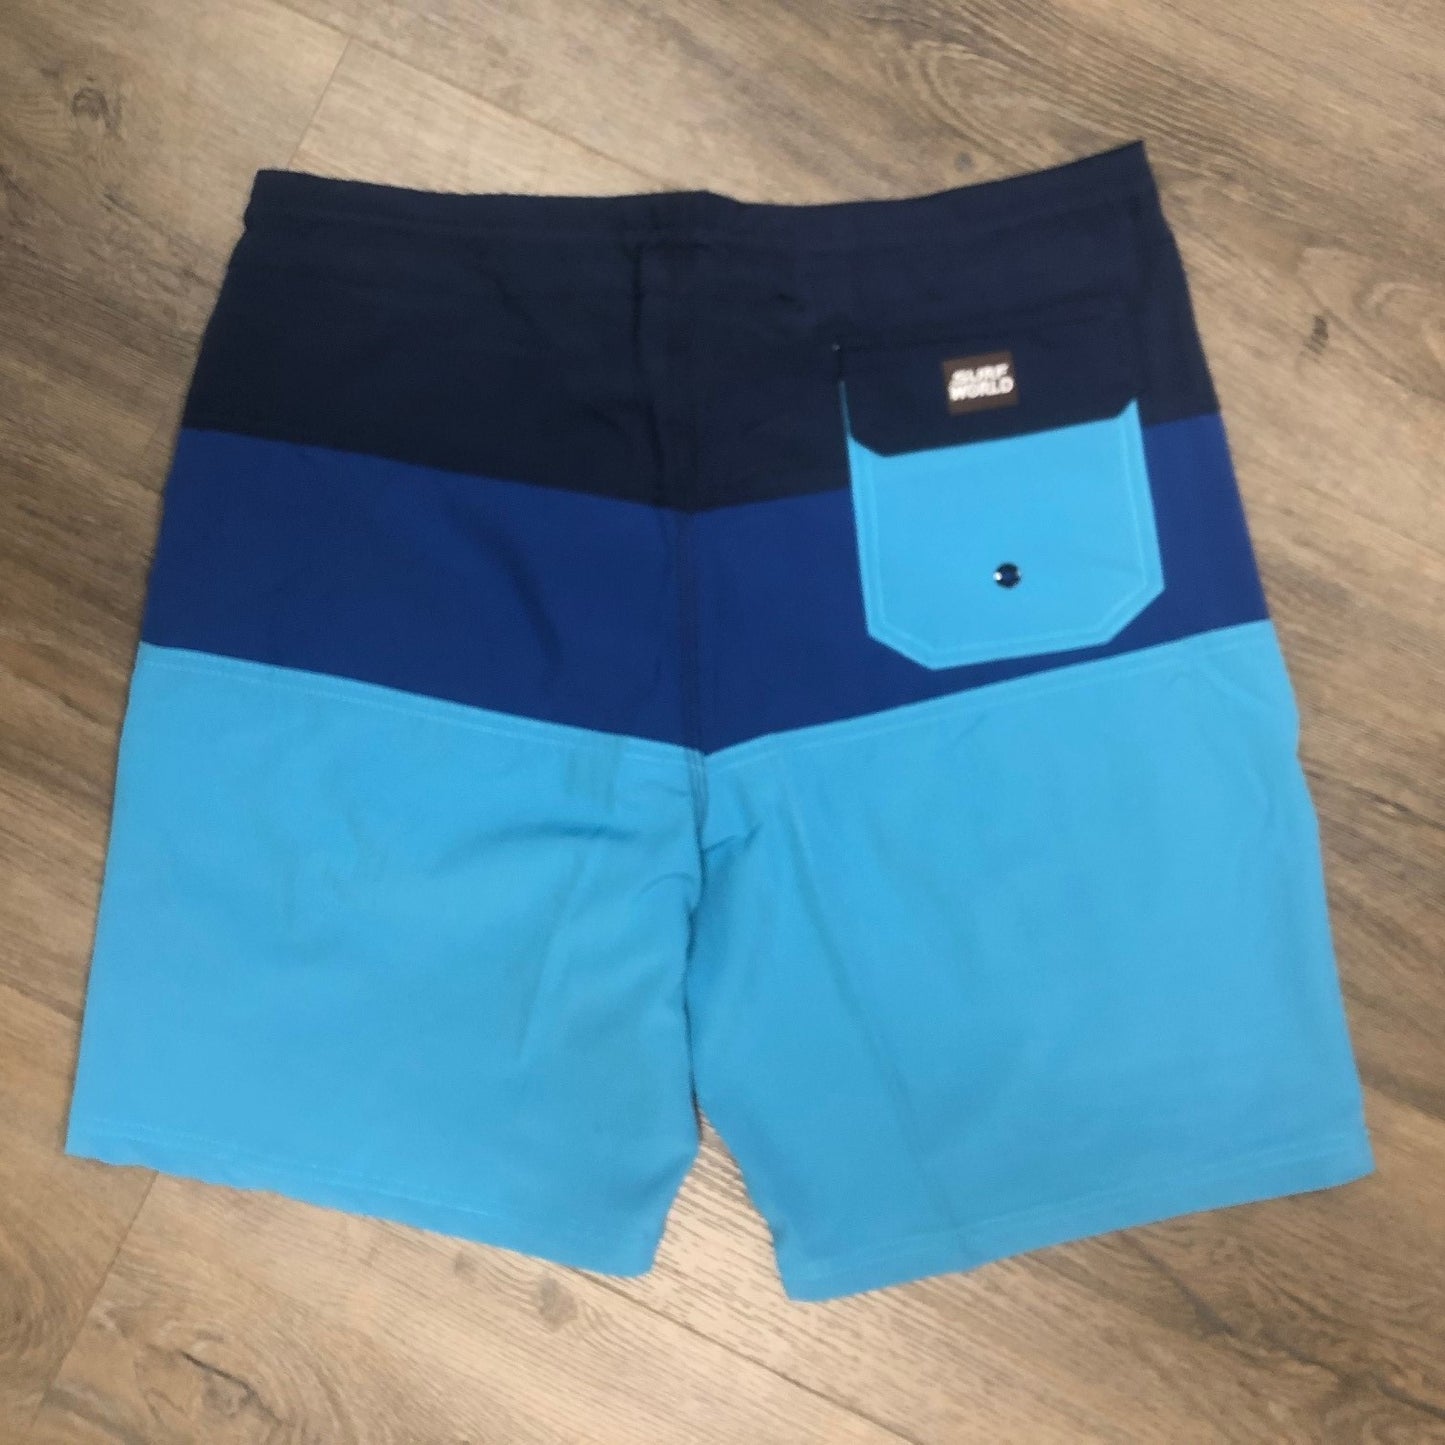 Surf World Triple Tail Boardshorts - The Surf World Collection - Navy Mens Boardshorts